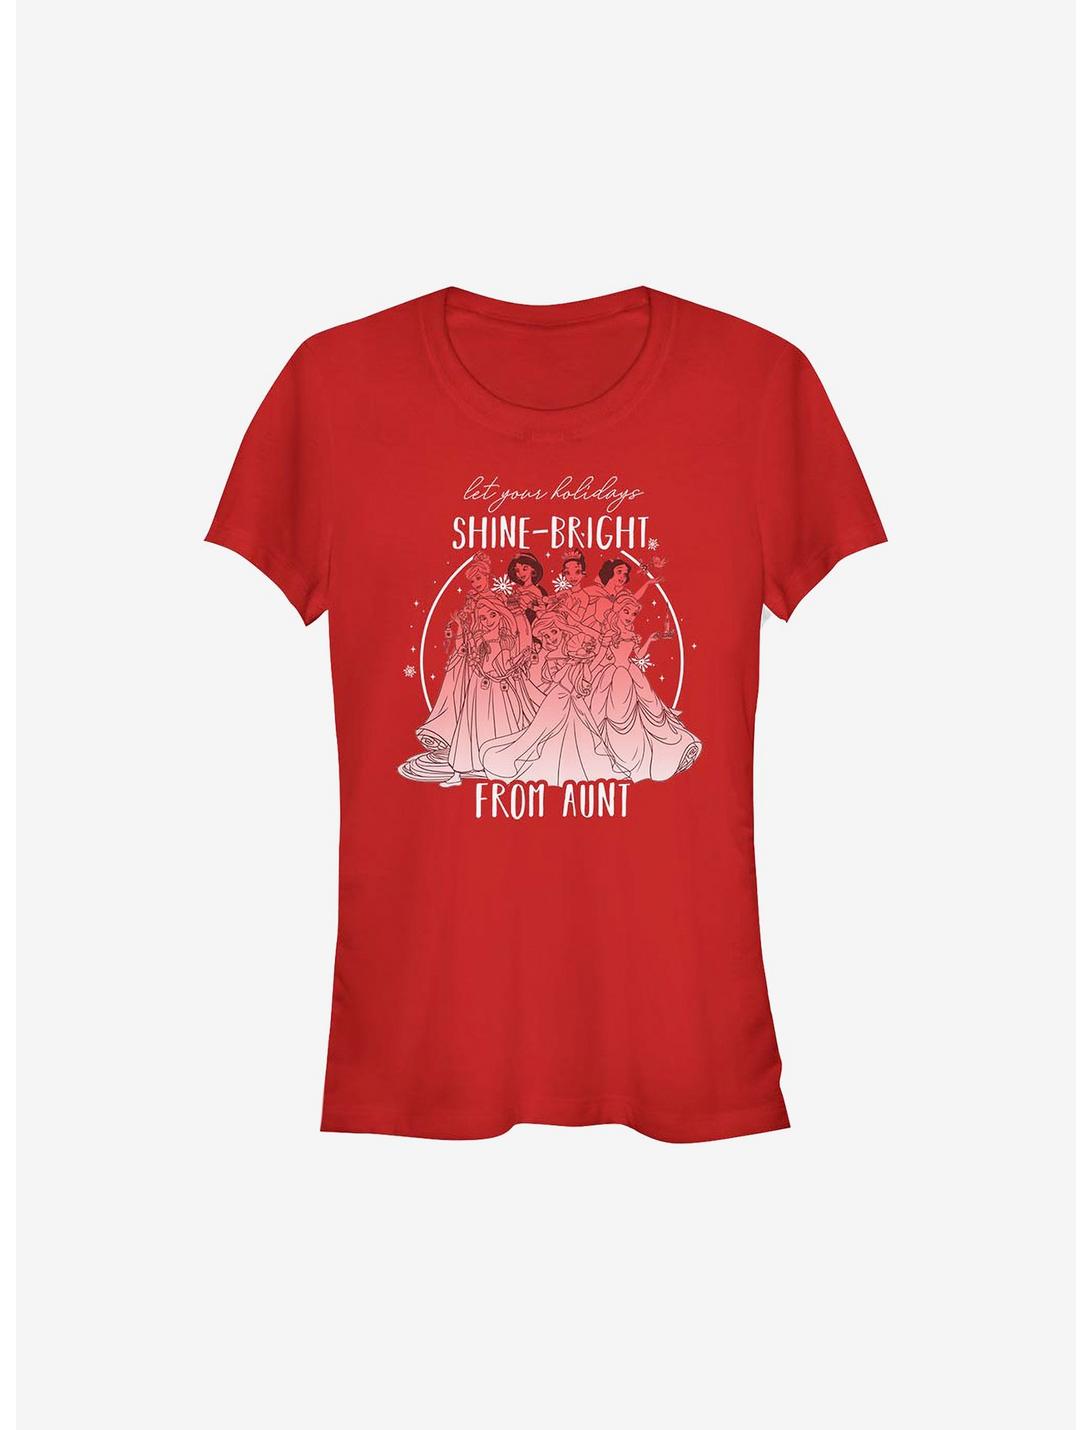 Disney Princesses Shine Bright From Aunt Girls T-Shirt, RED, hi-res